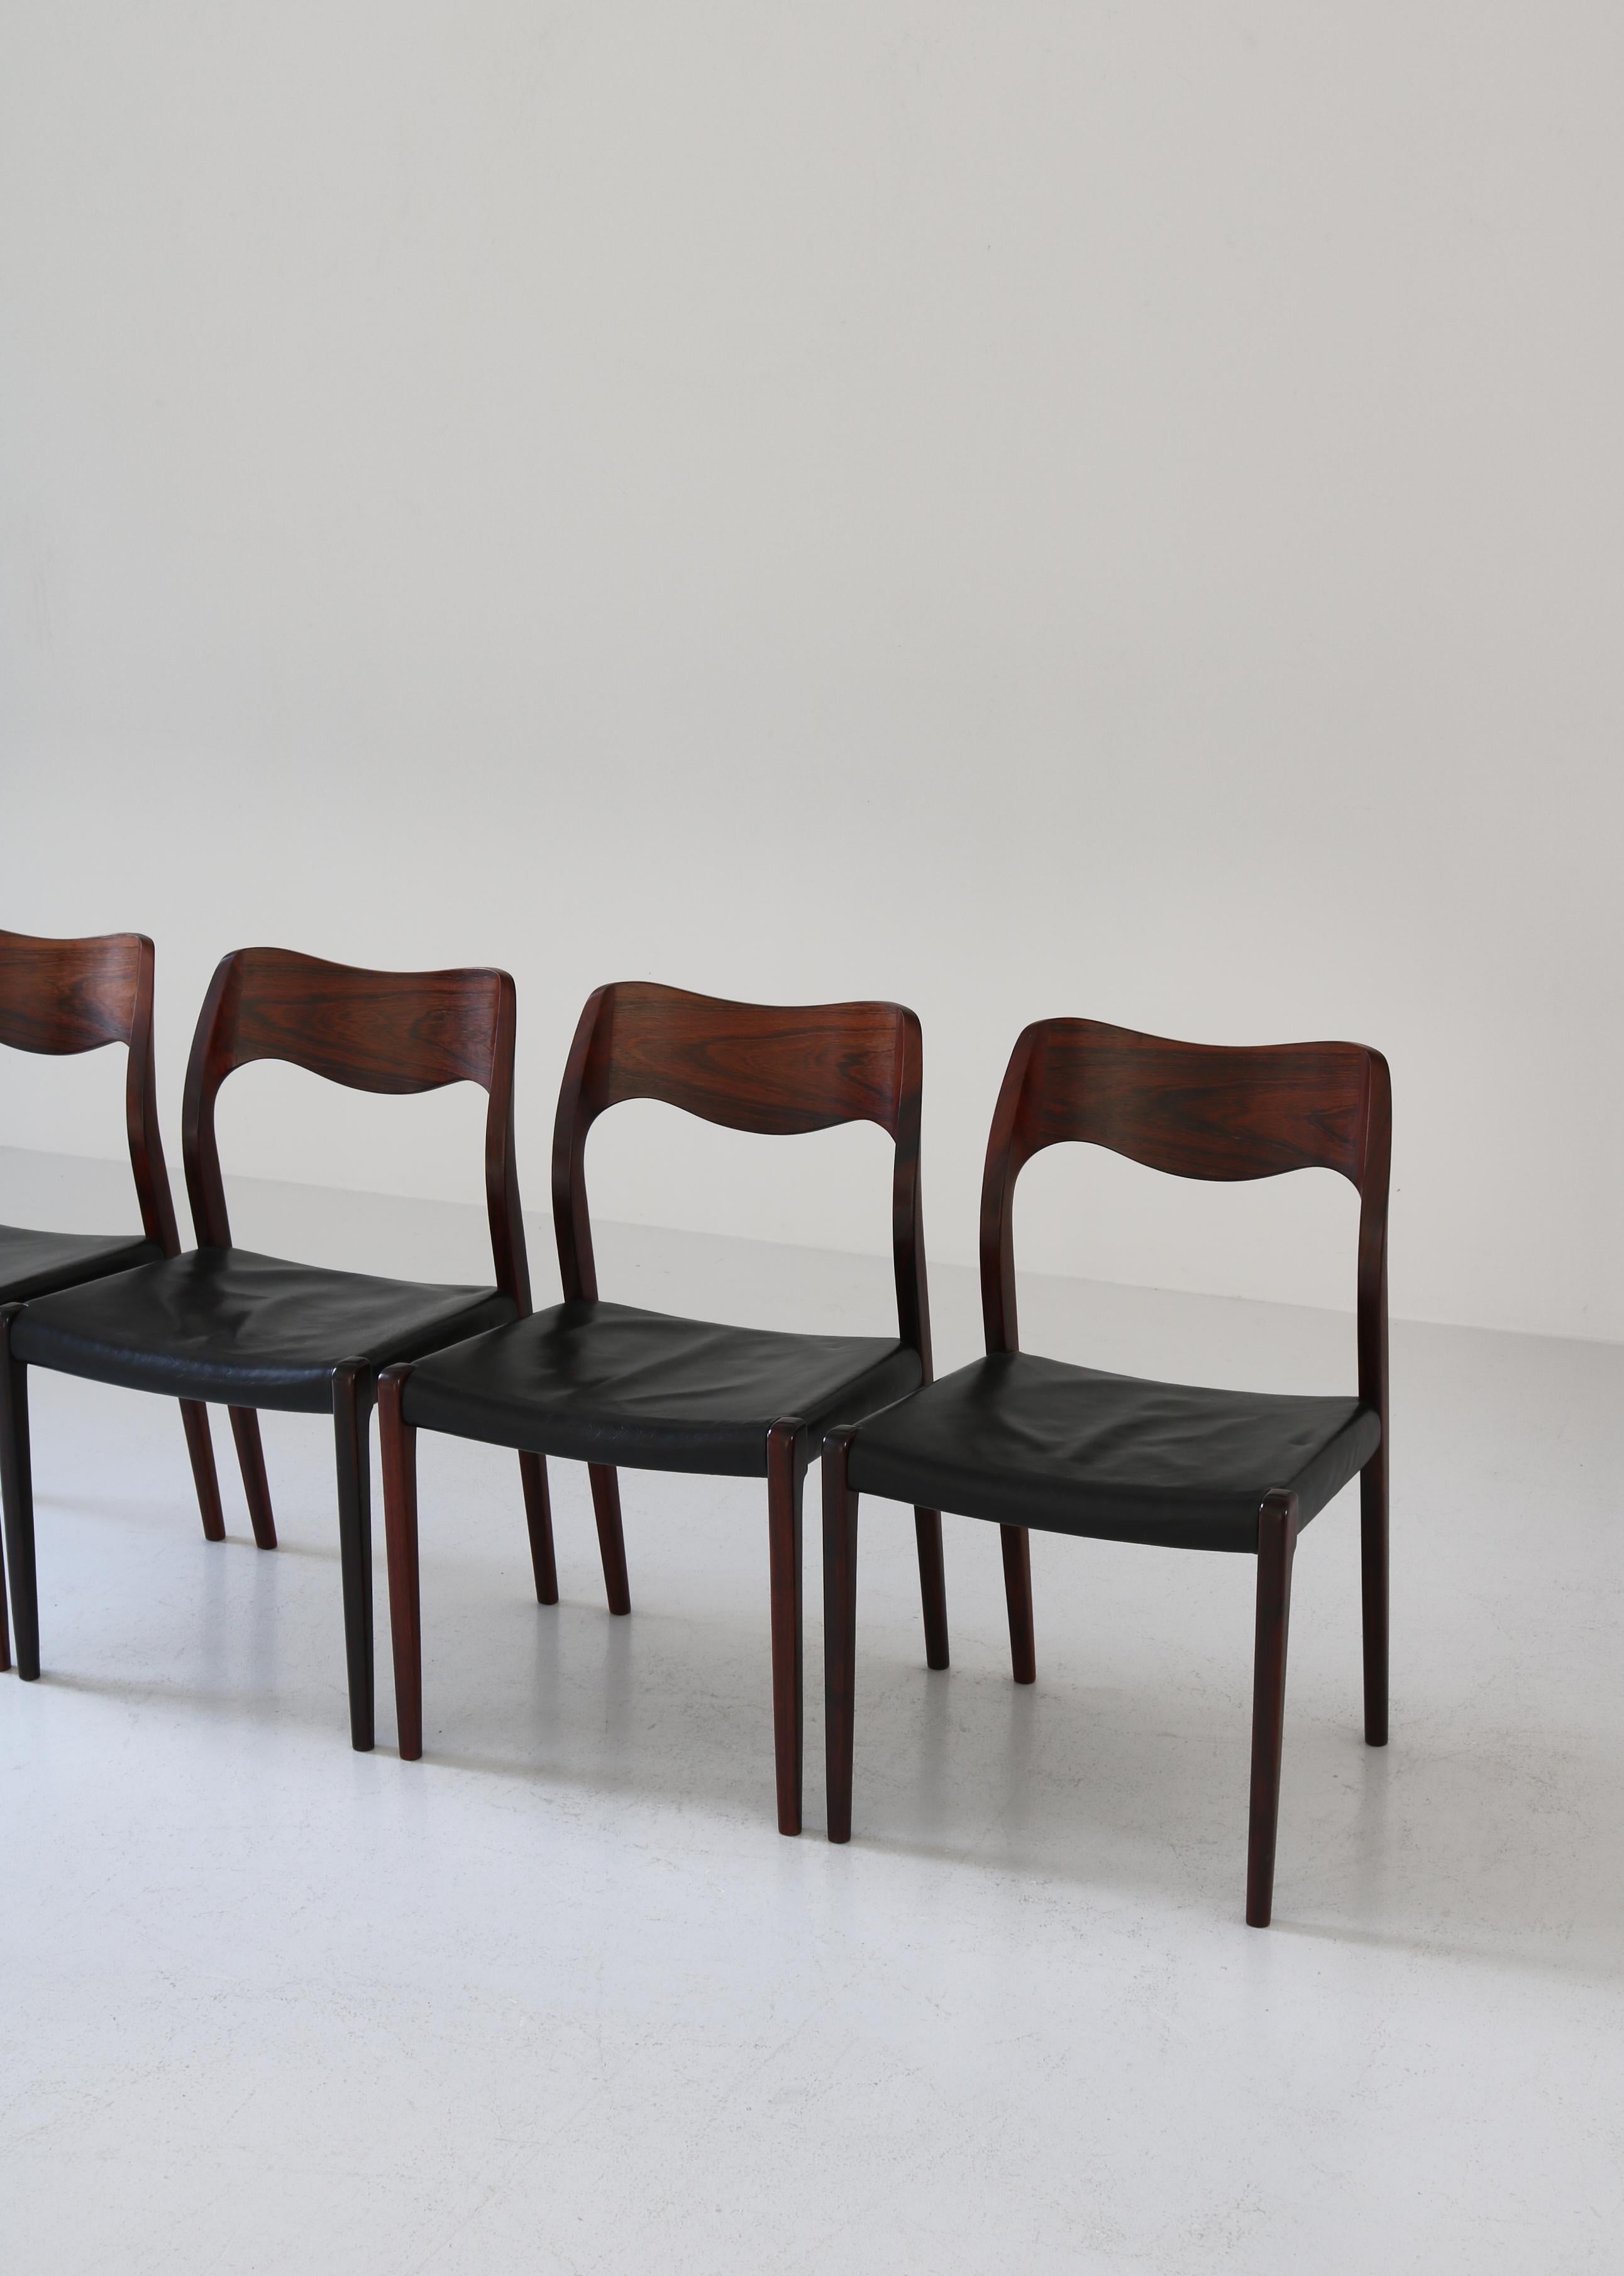 Set of Danish Modern Dining Chairs by N.O. Møller, Rosewood & Black Leather 1